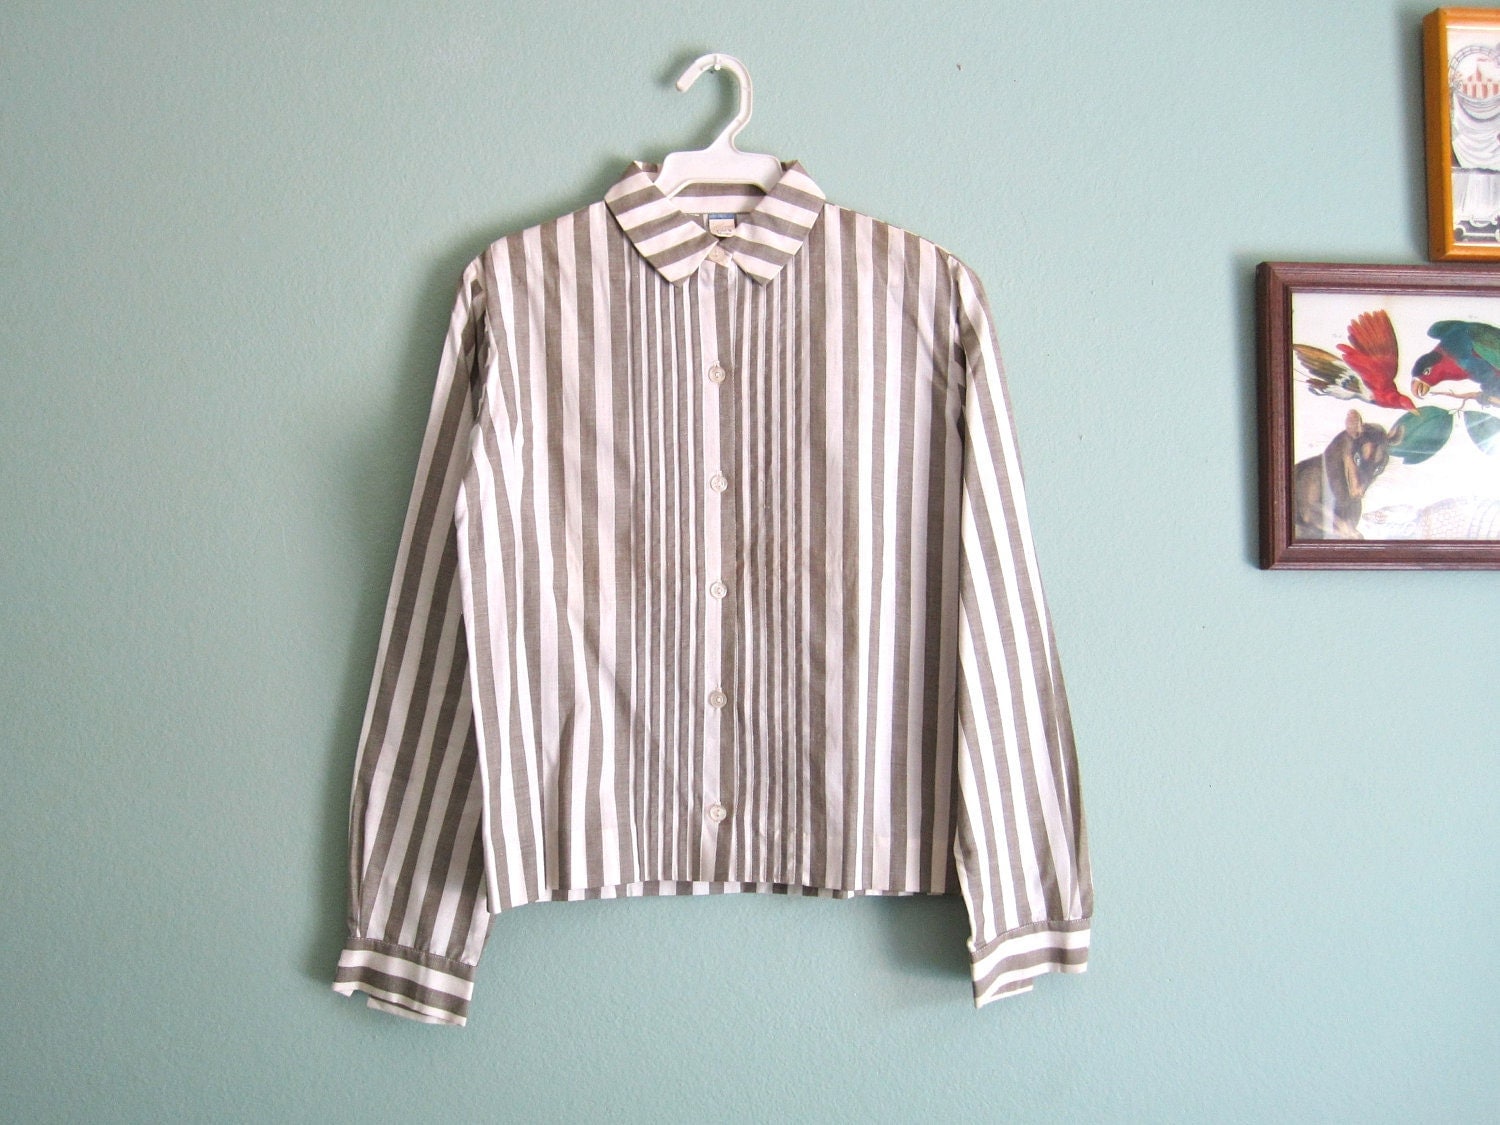 1960s blouse/ The Villager deadstock NOS striped top/ Mad Men